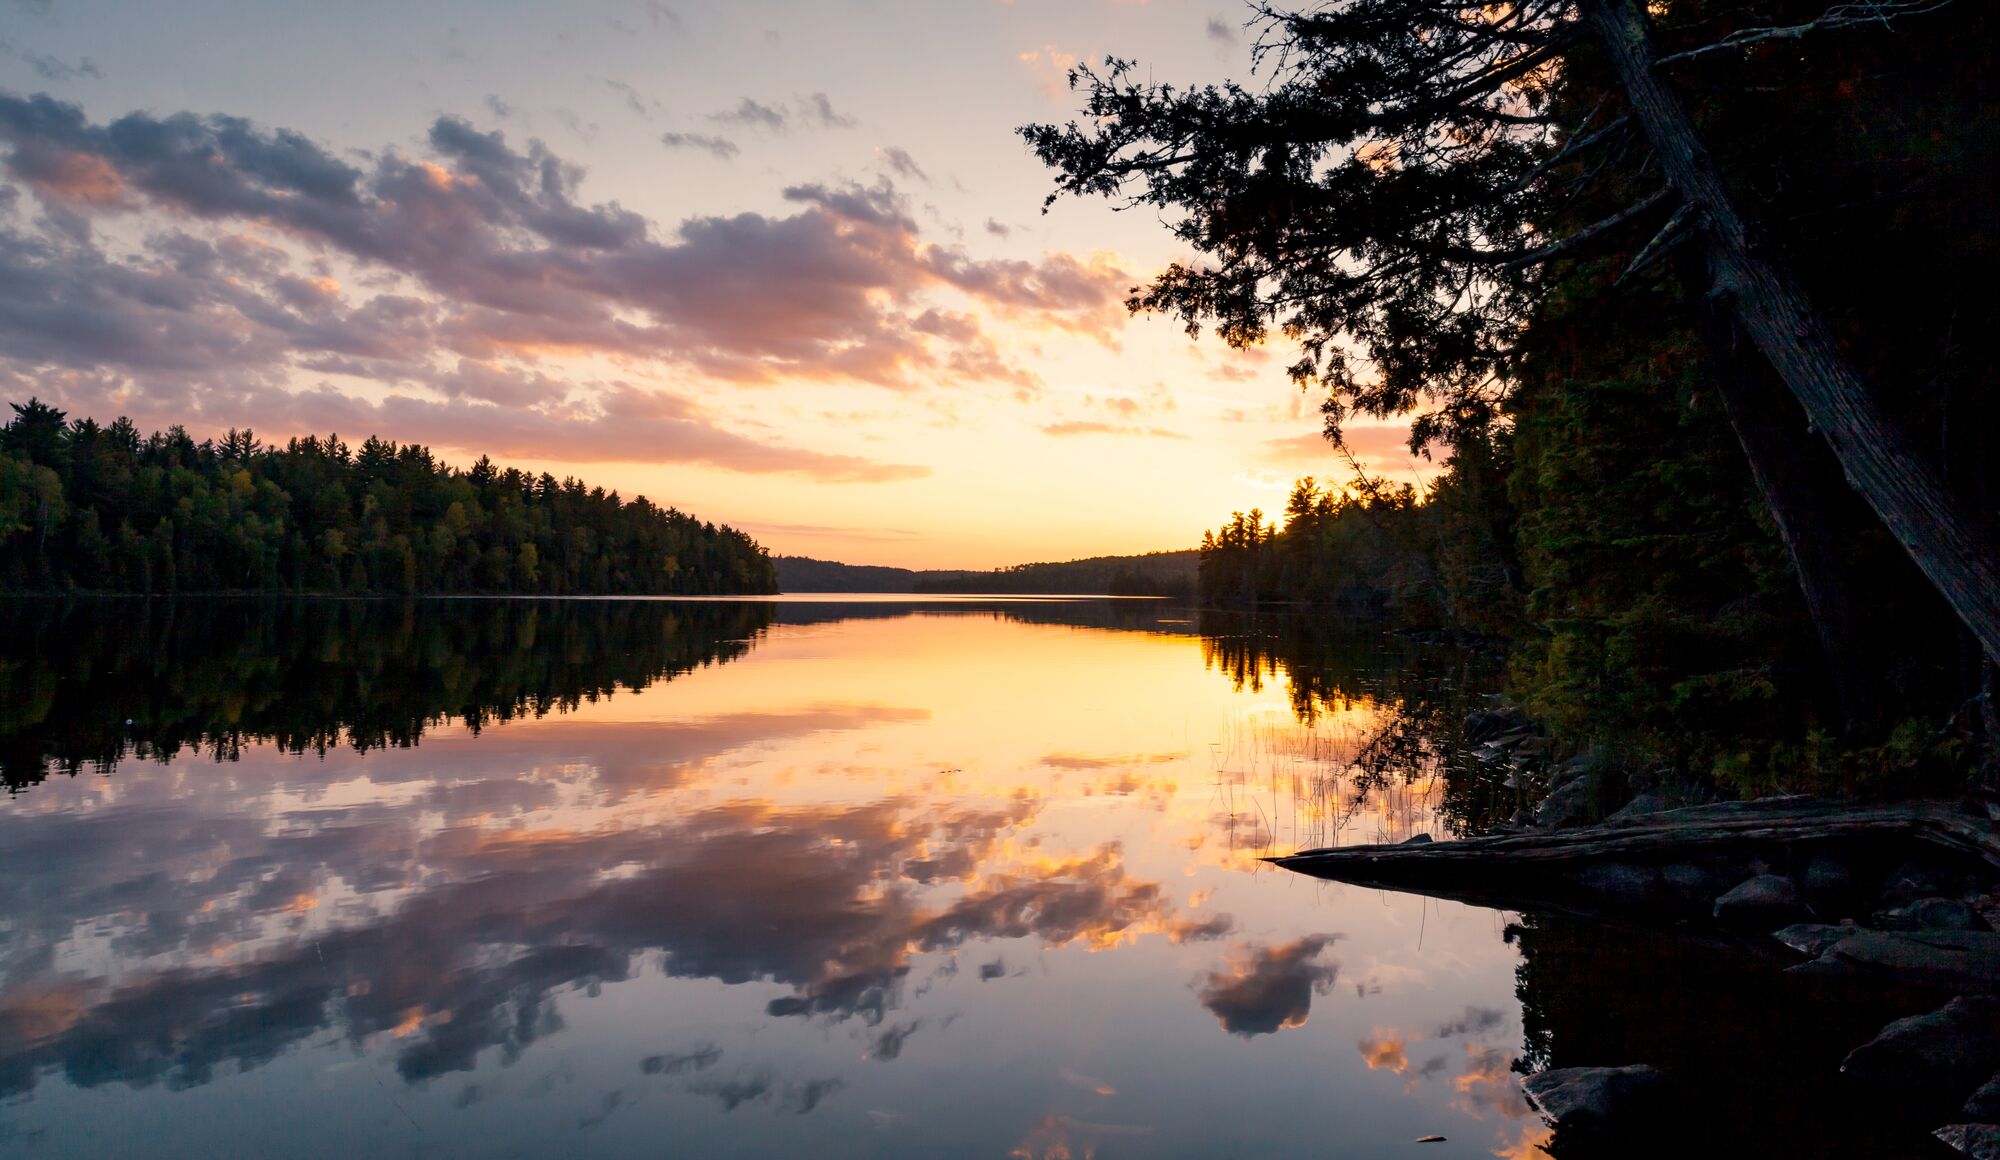 The sun sets over Alder Lake in the Boundary Waters Canoe Area Wilderness in Minnesota.